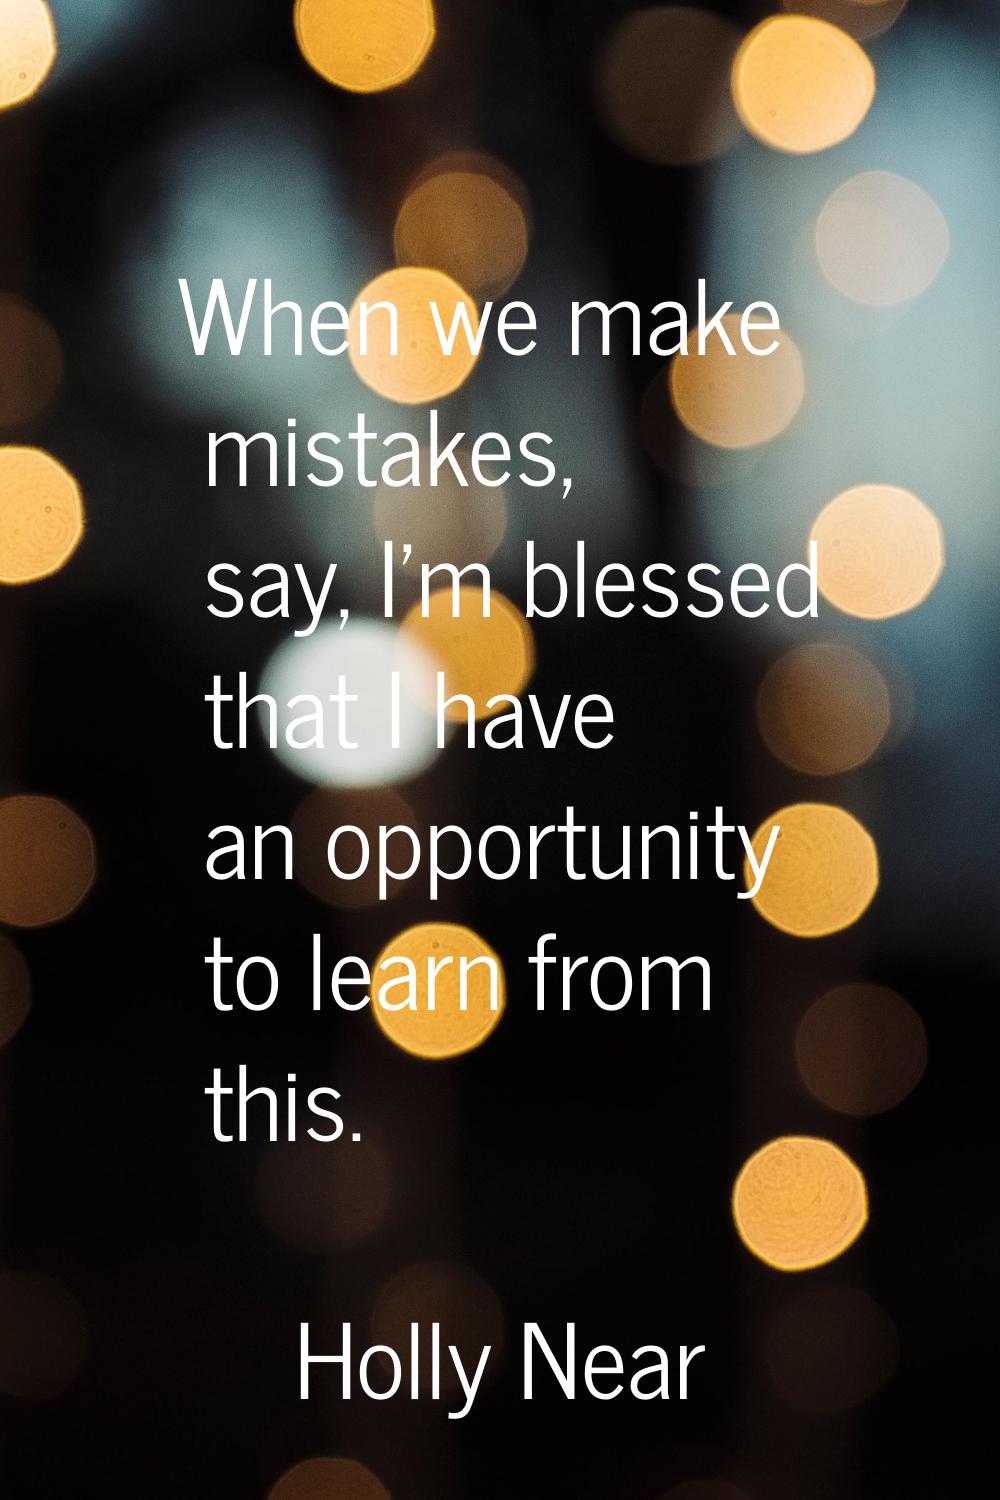 When we make mistakes, say, I'm blessed that I have an opportunity to learn from this.